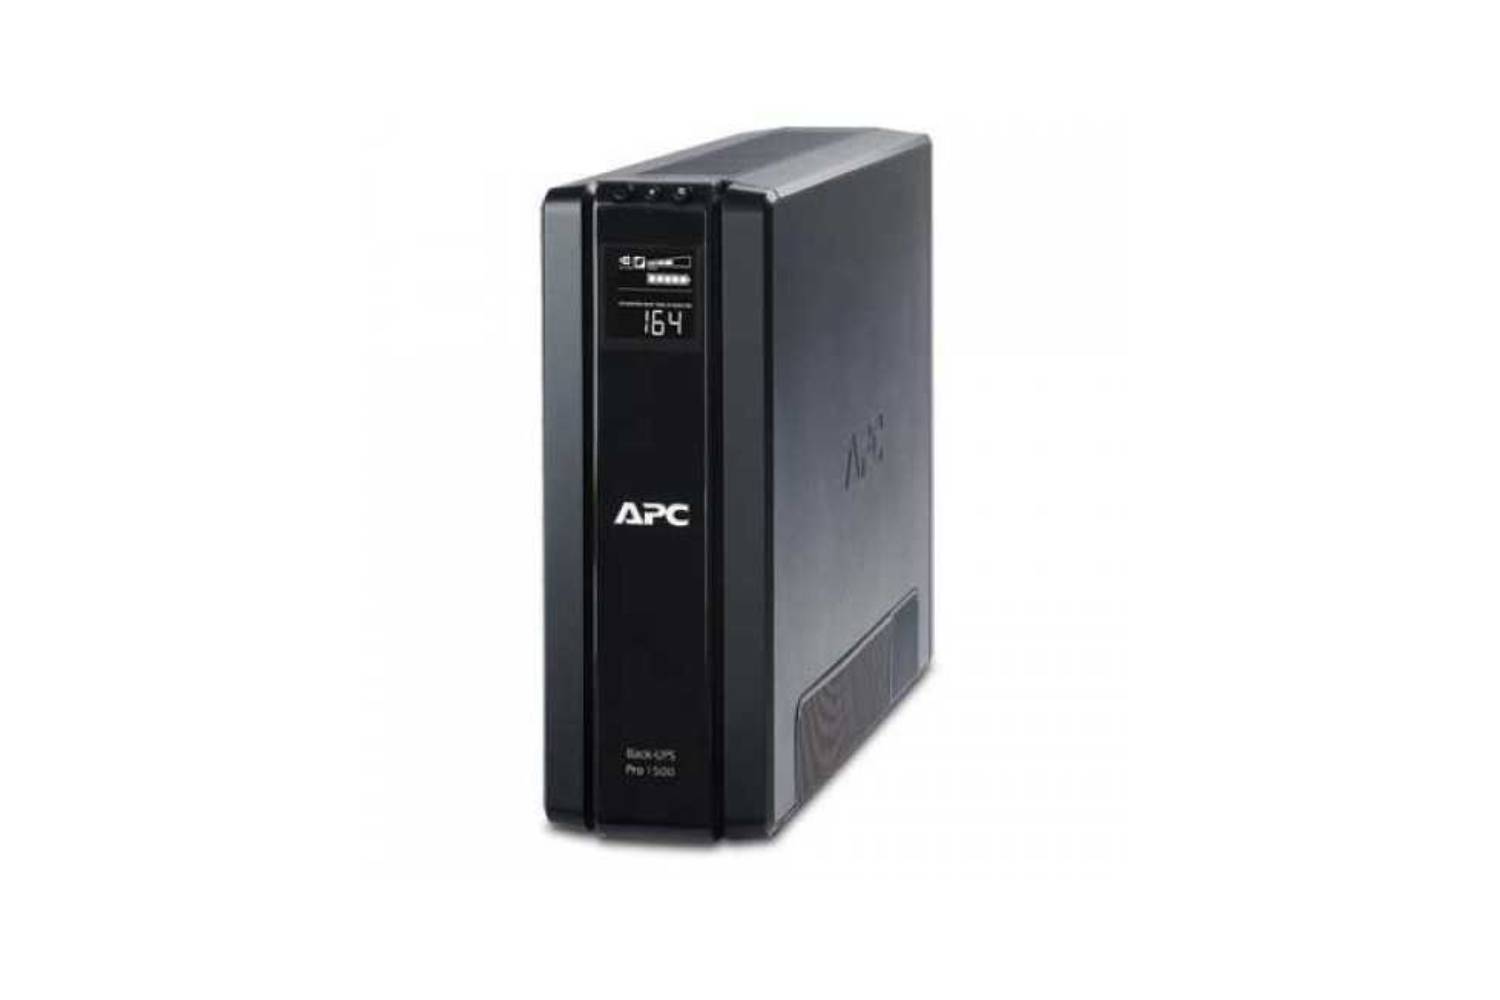 APC UPS BR1500G-IN | 1500VA/865W | A High-Performance UPS System for Home Office & Home Entertainment Devices